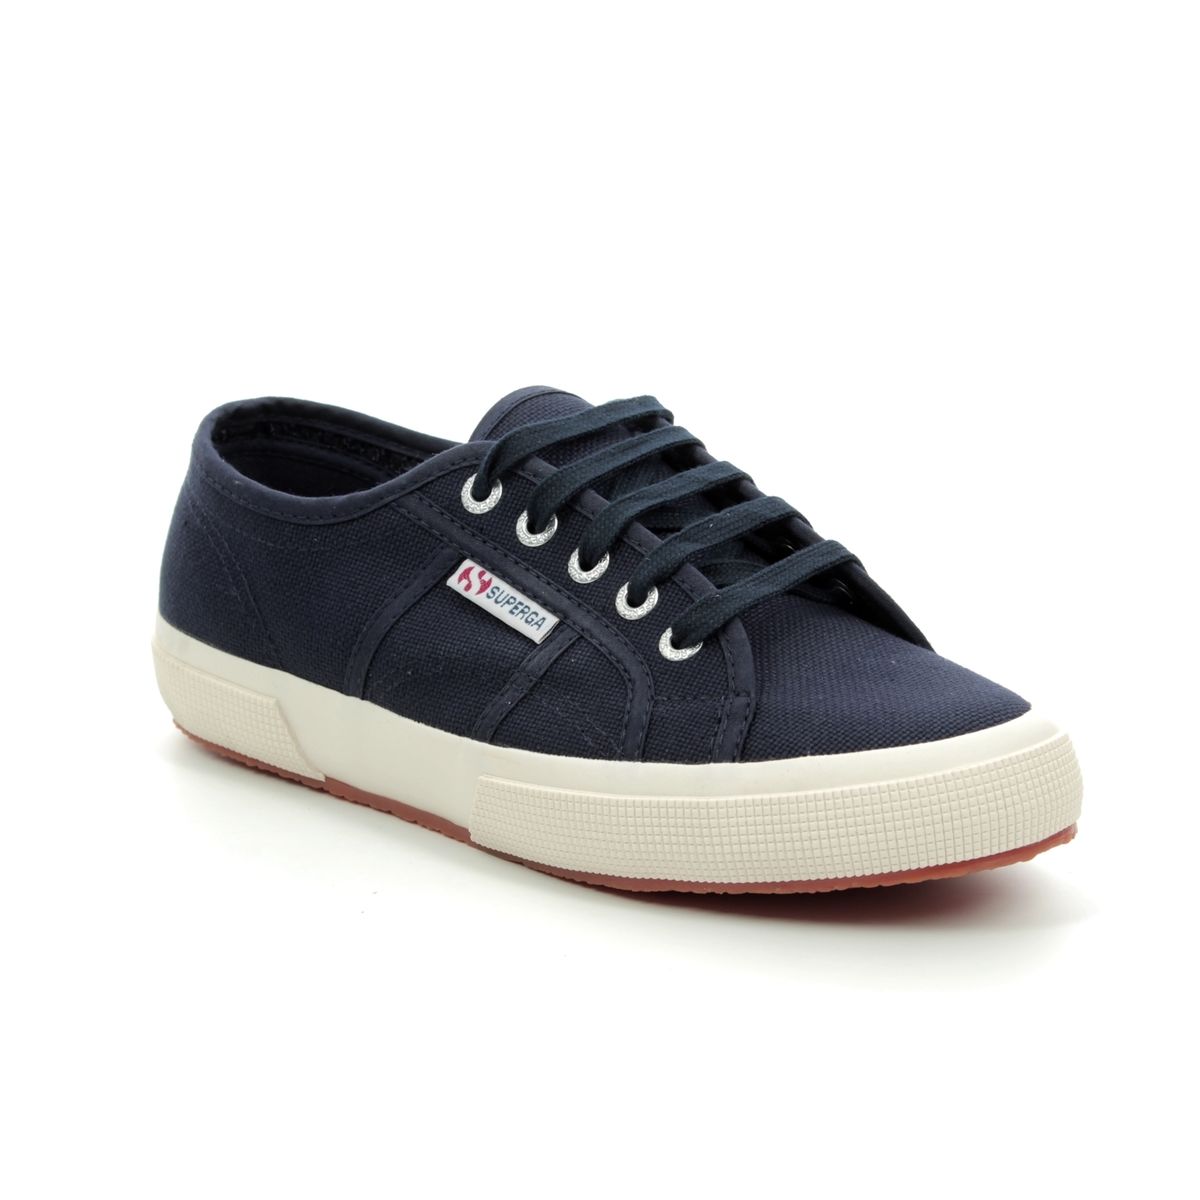 Superga Cotu Navy Womens trainers S000010-933 in a Plain  in Size 36